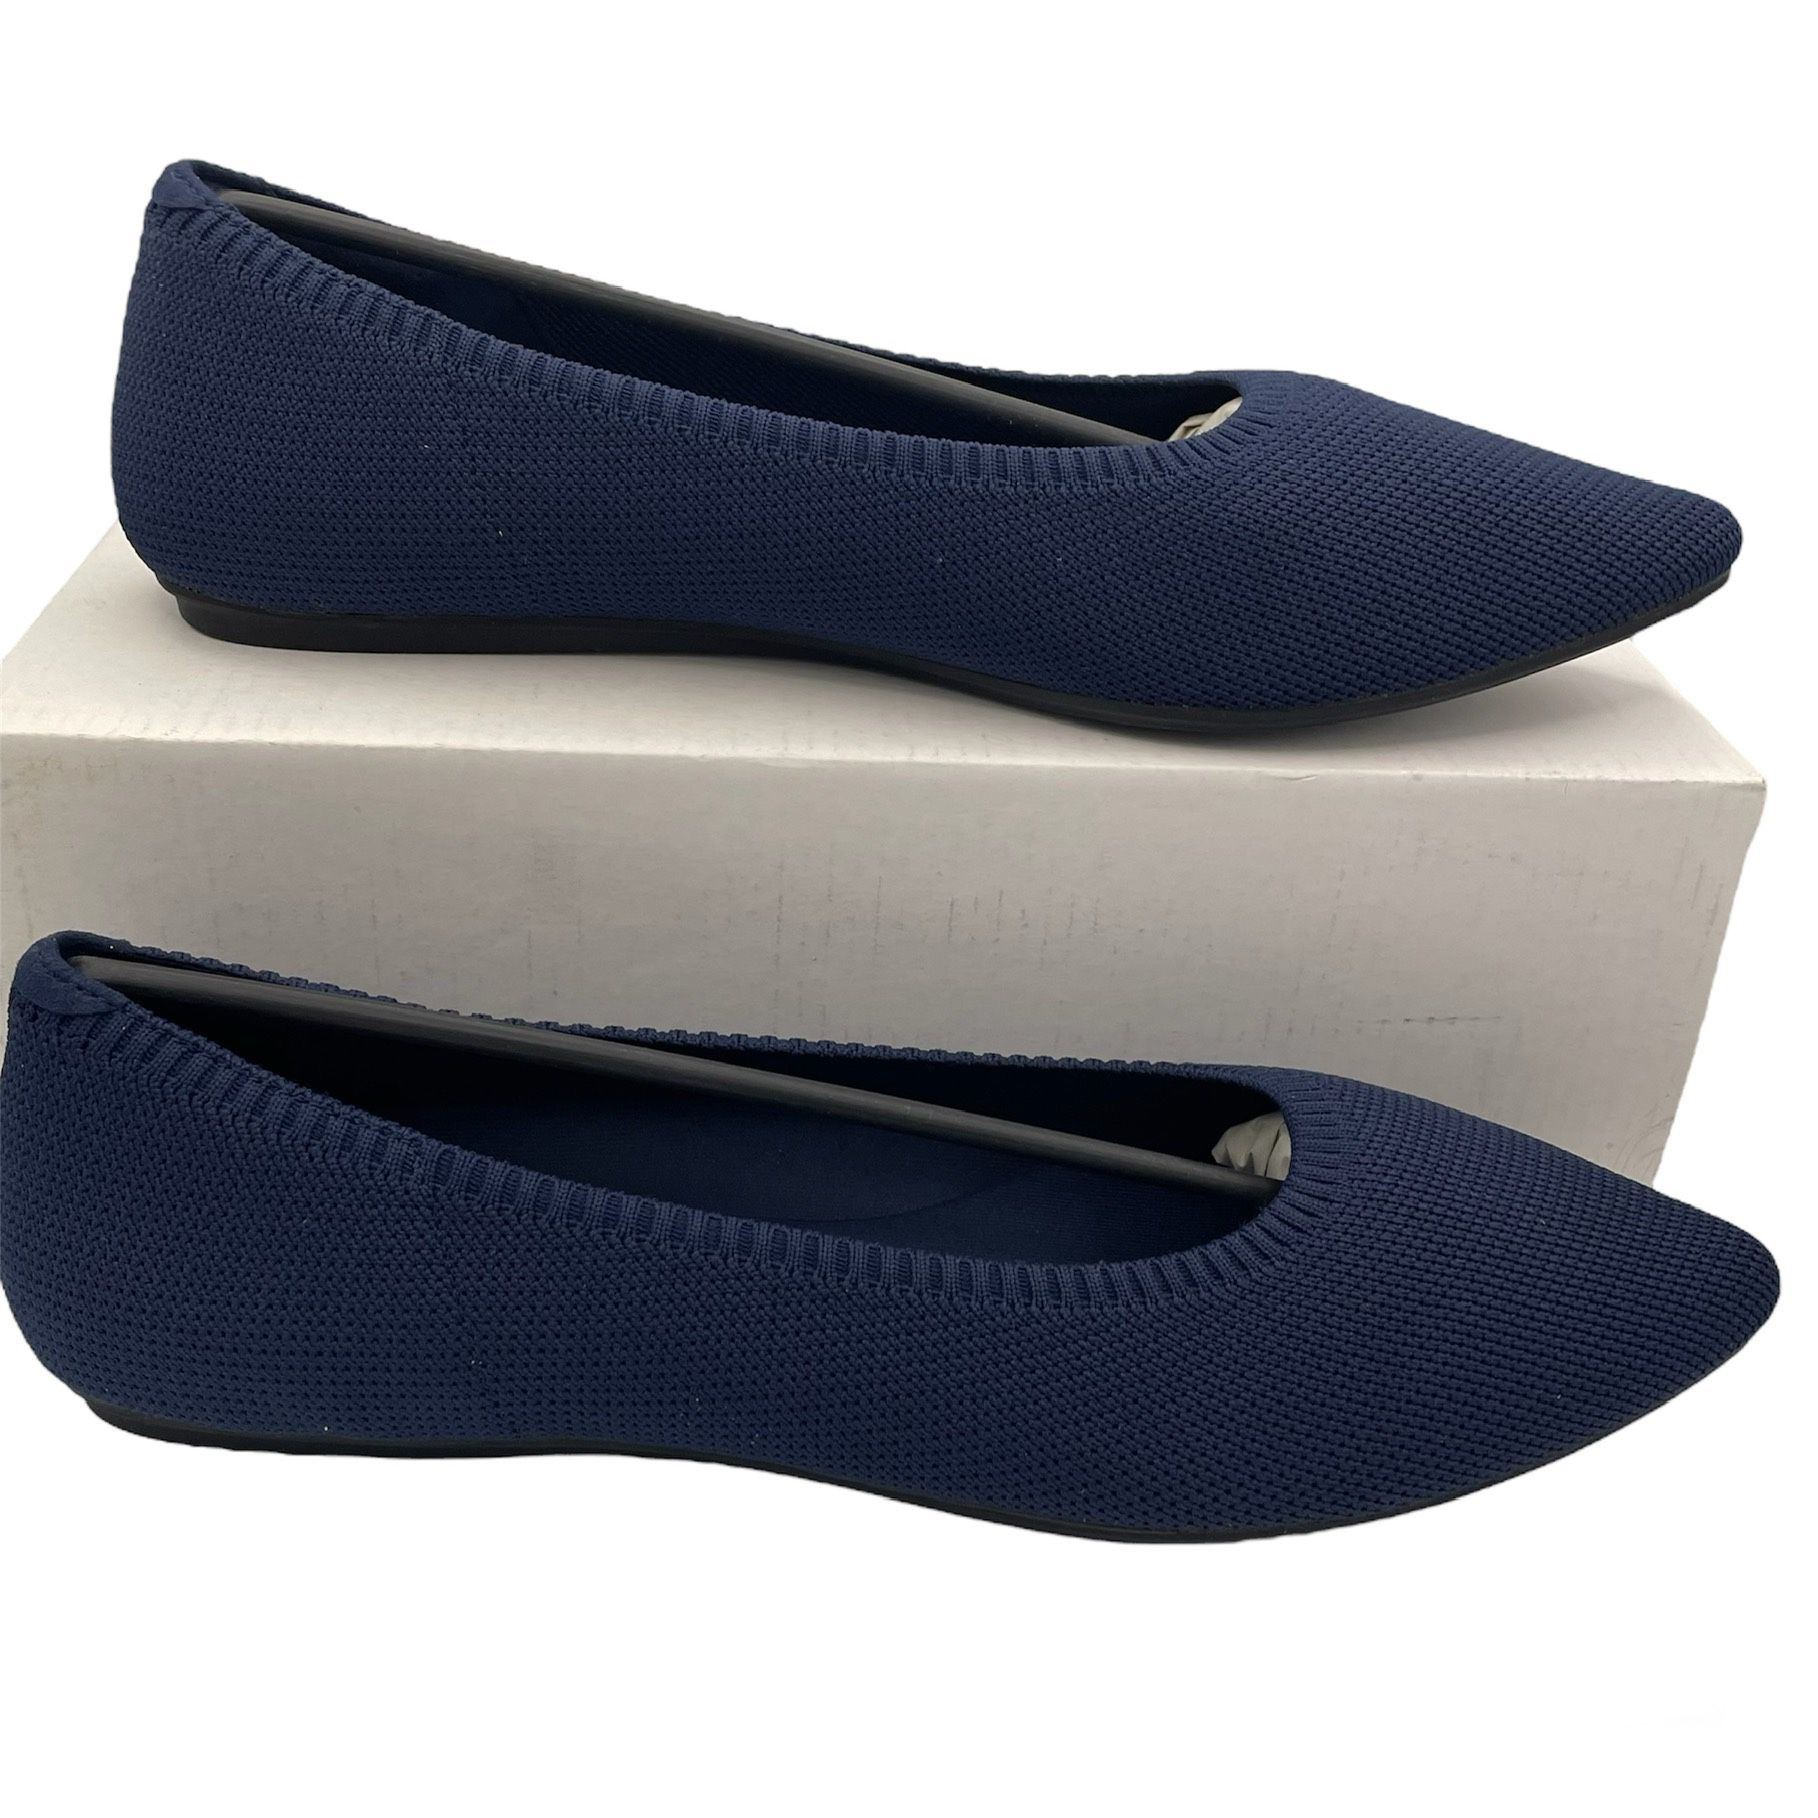 Arromic knit pointed toe slip on comfy casual flats women Size 11